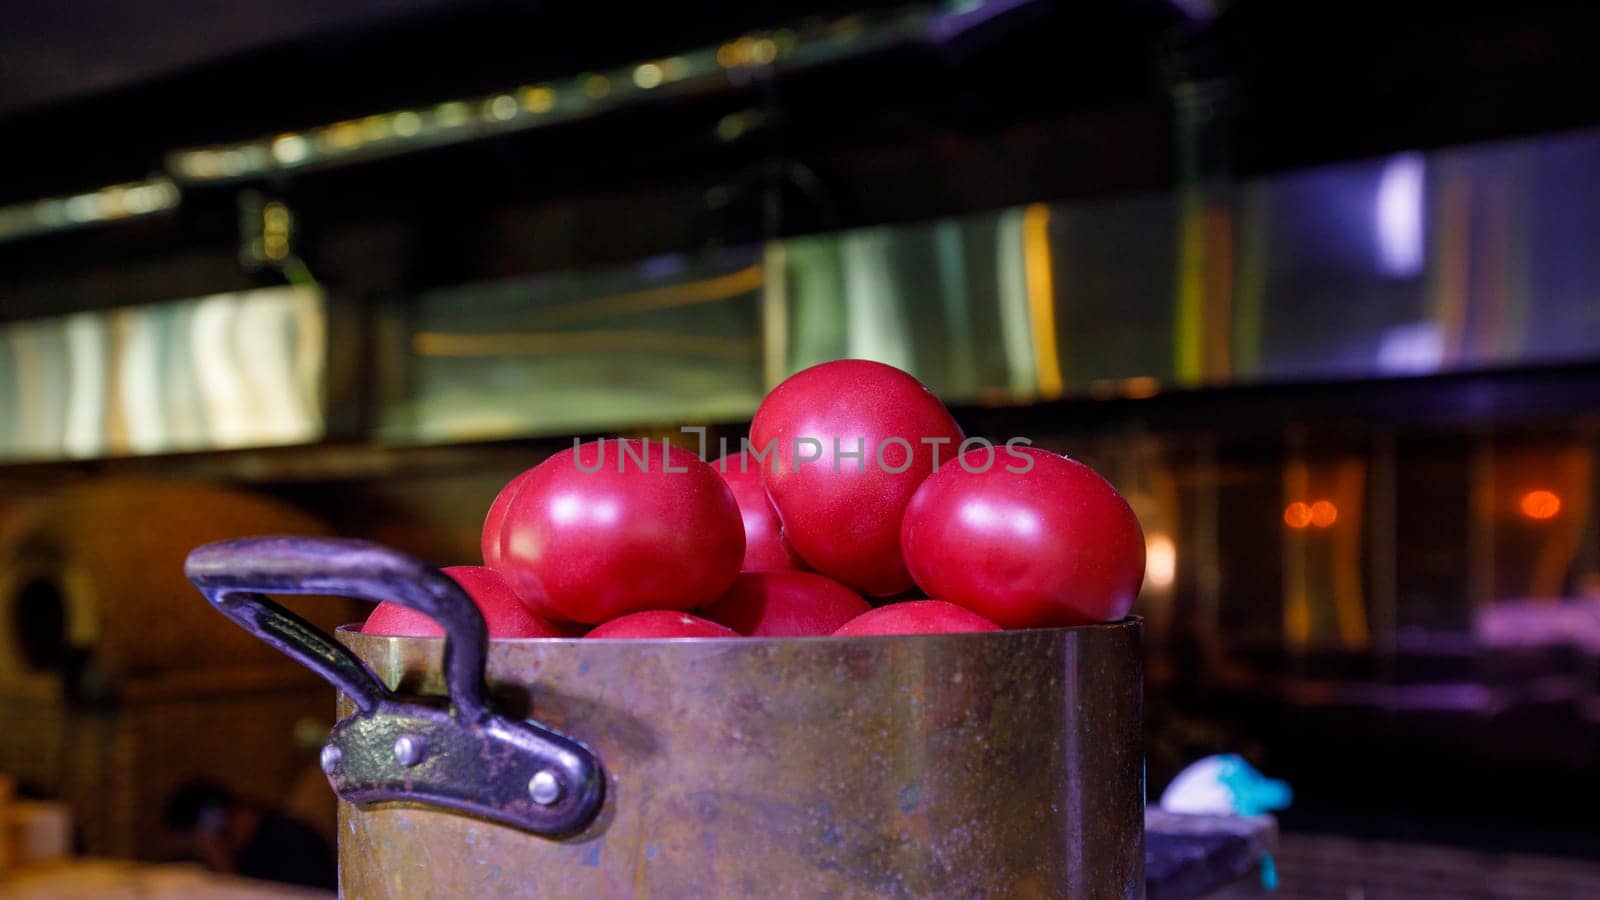 tomato in a saucepan, muted dark background. High quality photo